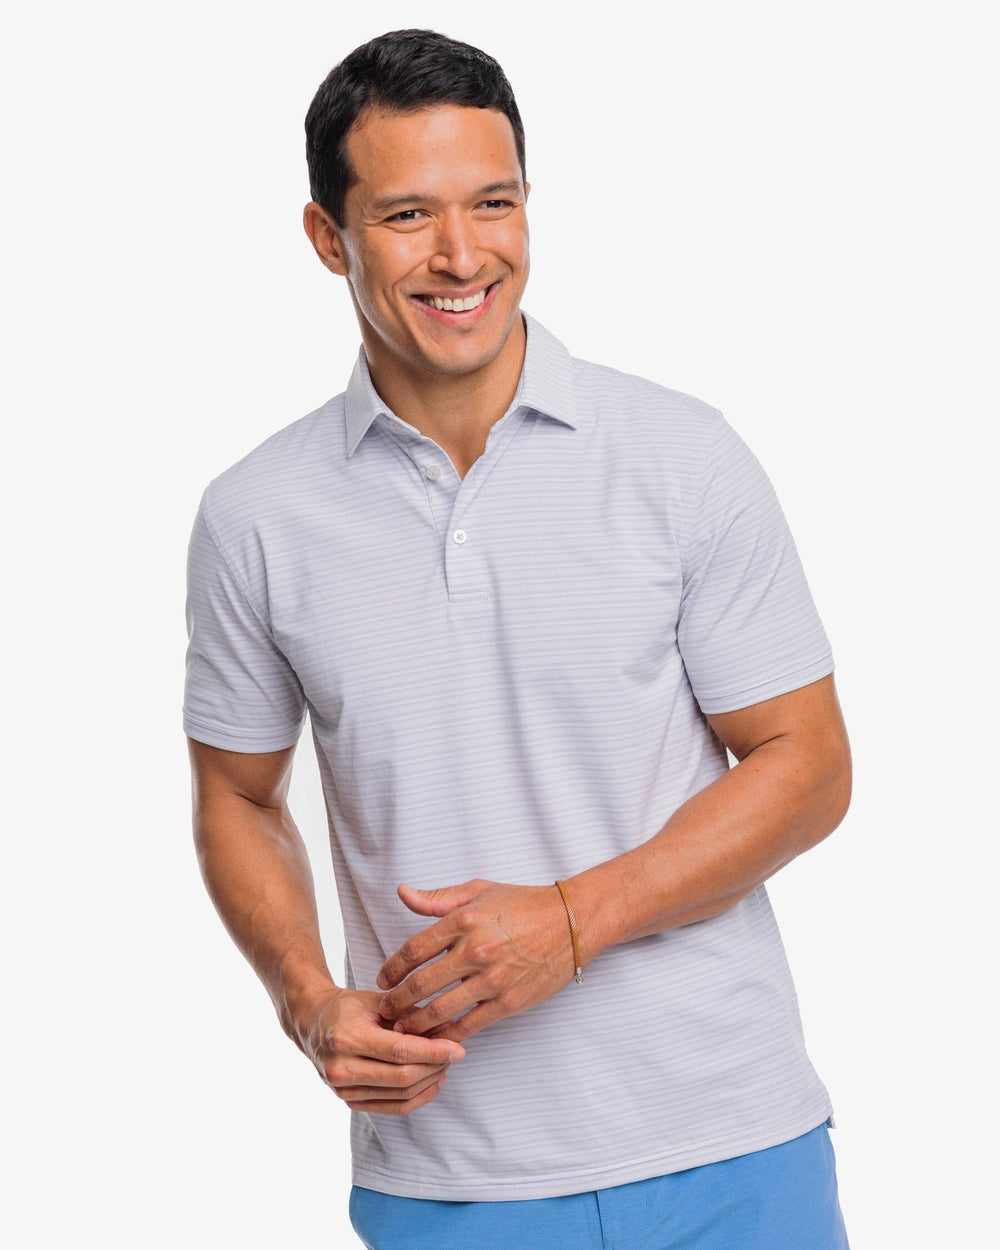 The front view of the Southern Tide brrr°®-eeze Bowen Stripe Performance Polo Shirt by Southern Tide - Slate Grey